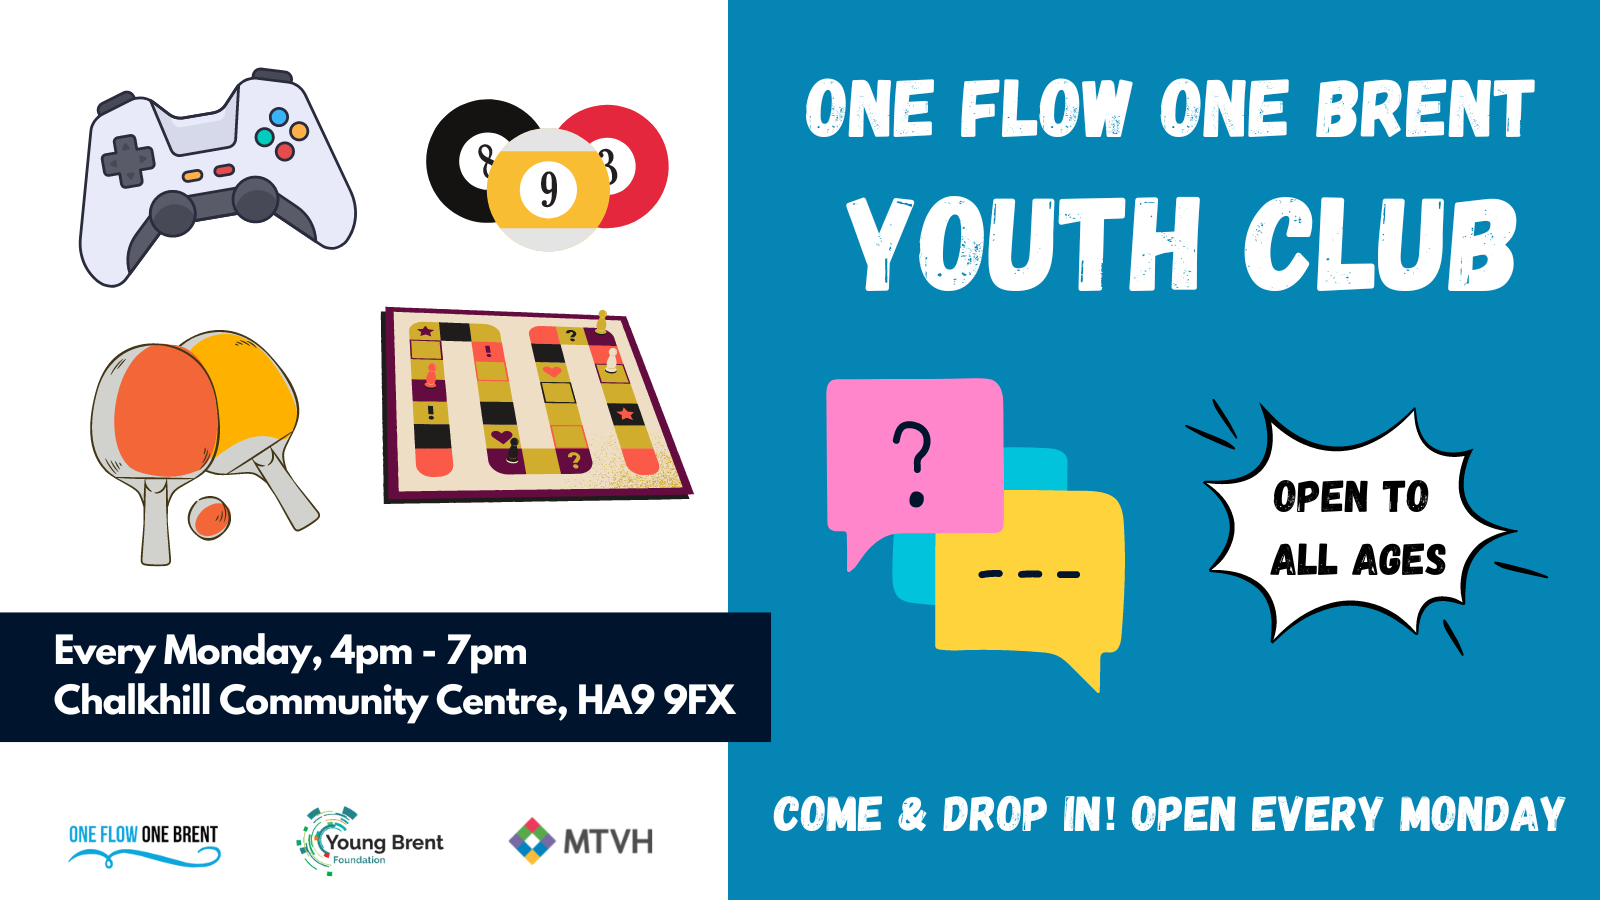 One Flow One Brent Youth Club 2